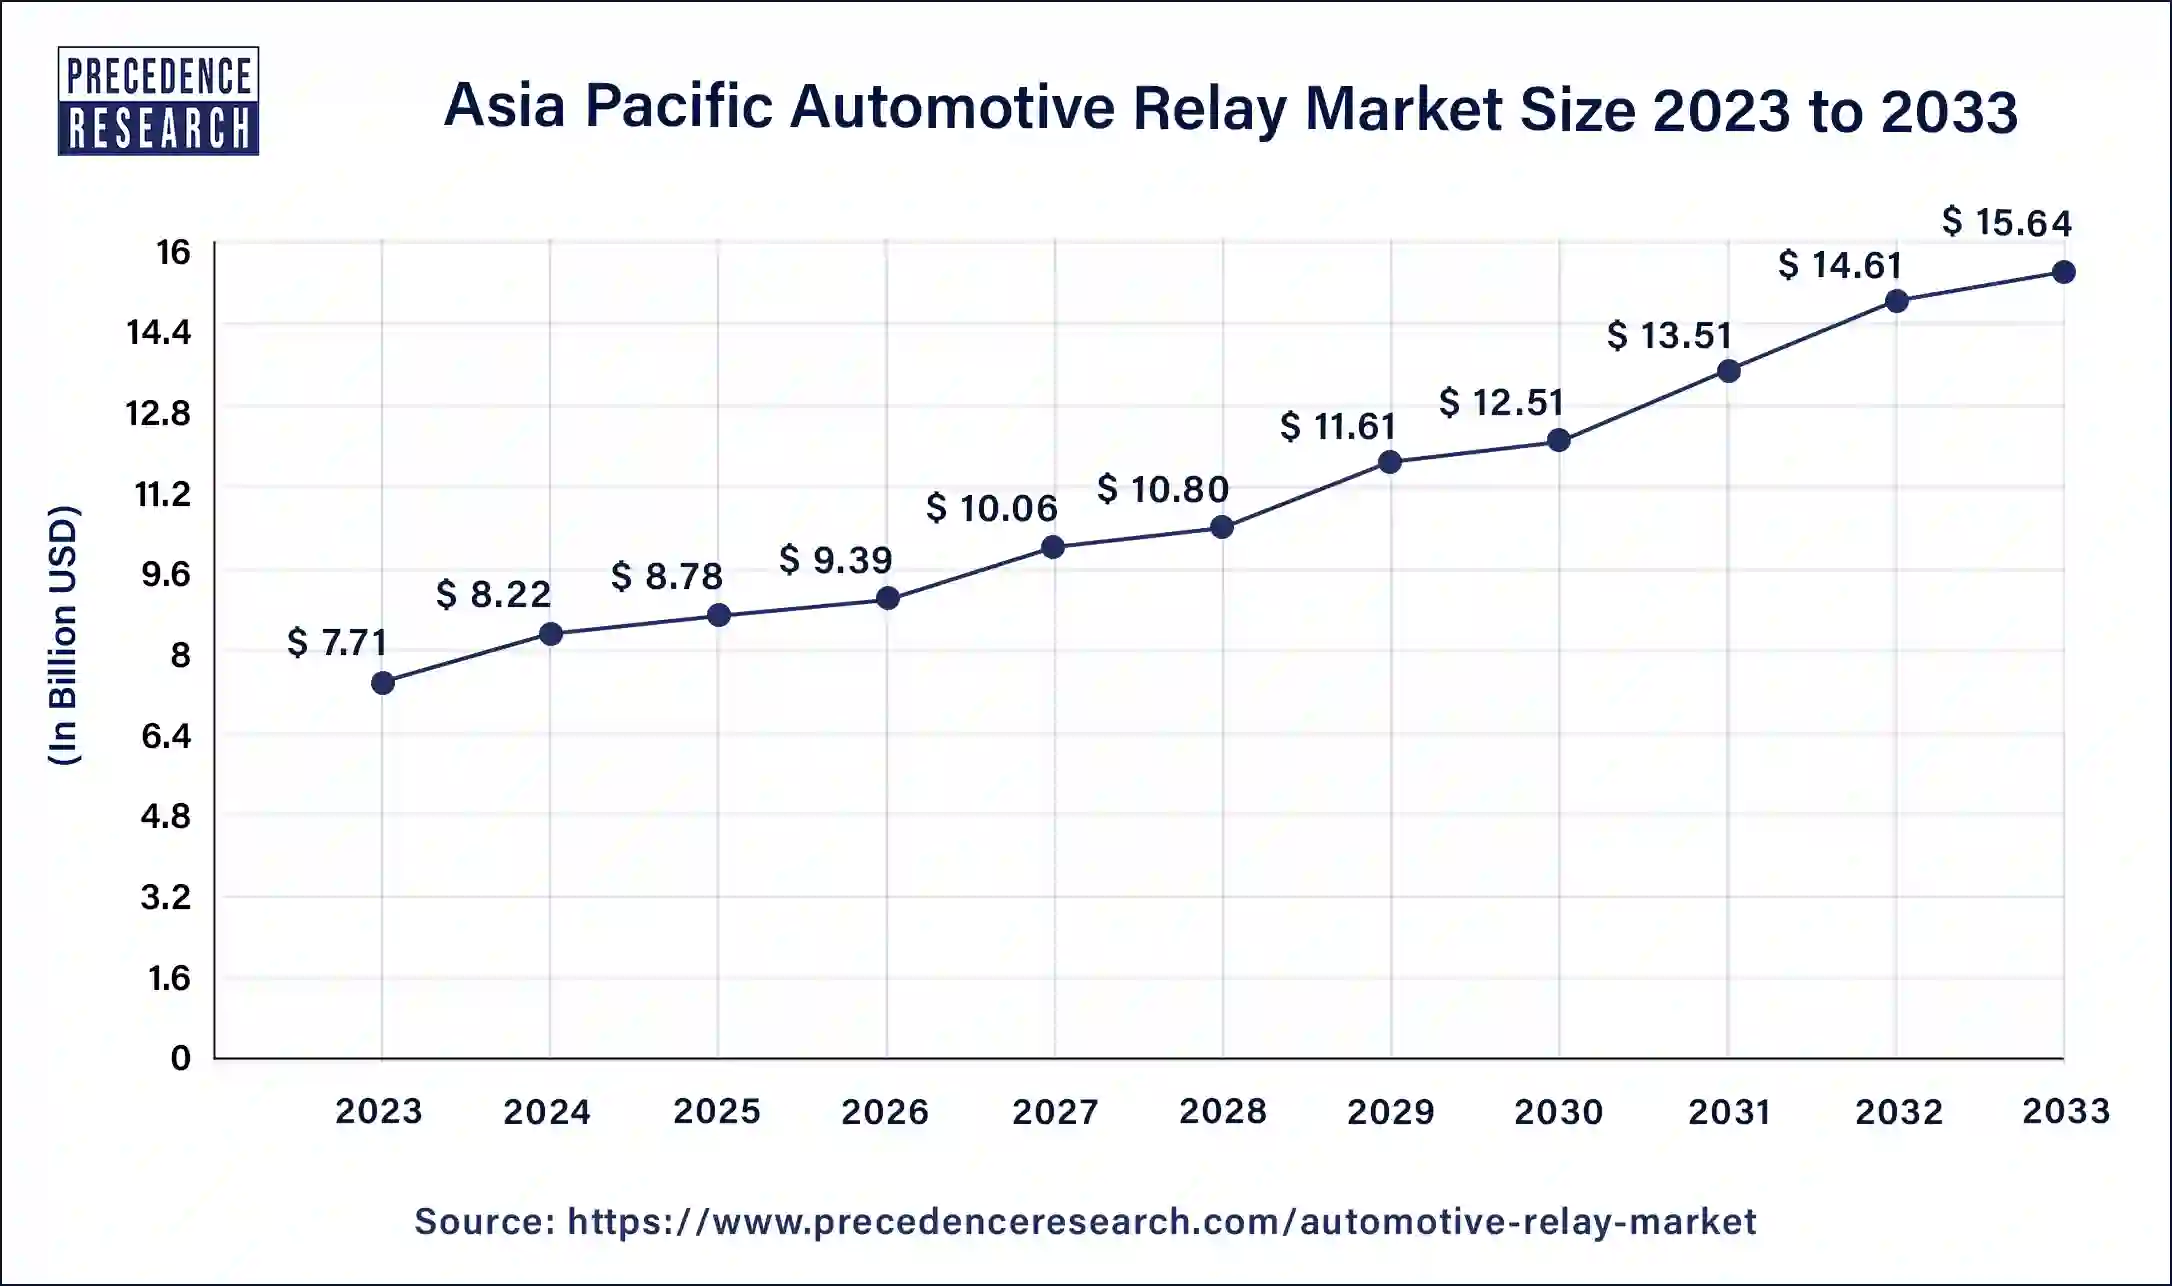 Asia Pacific Automotive Relay Market Size 2024 to 2033